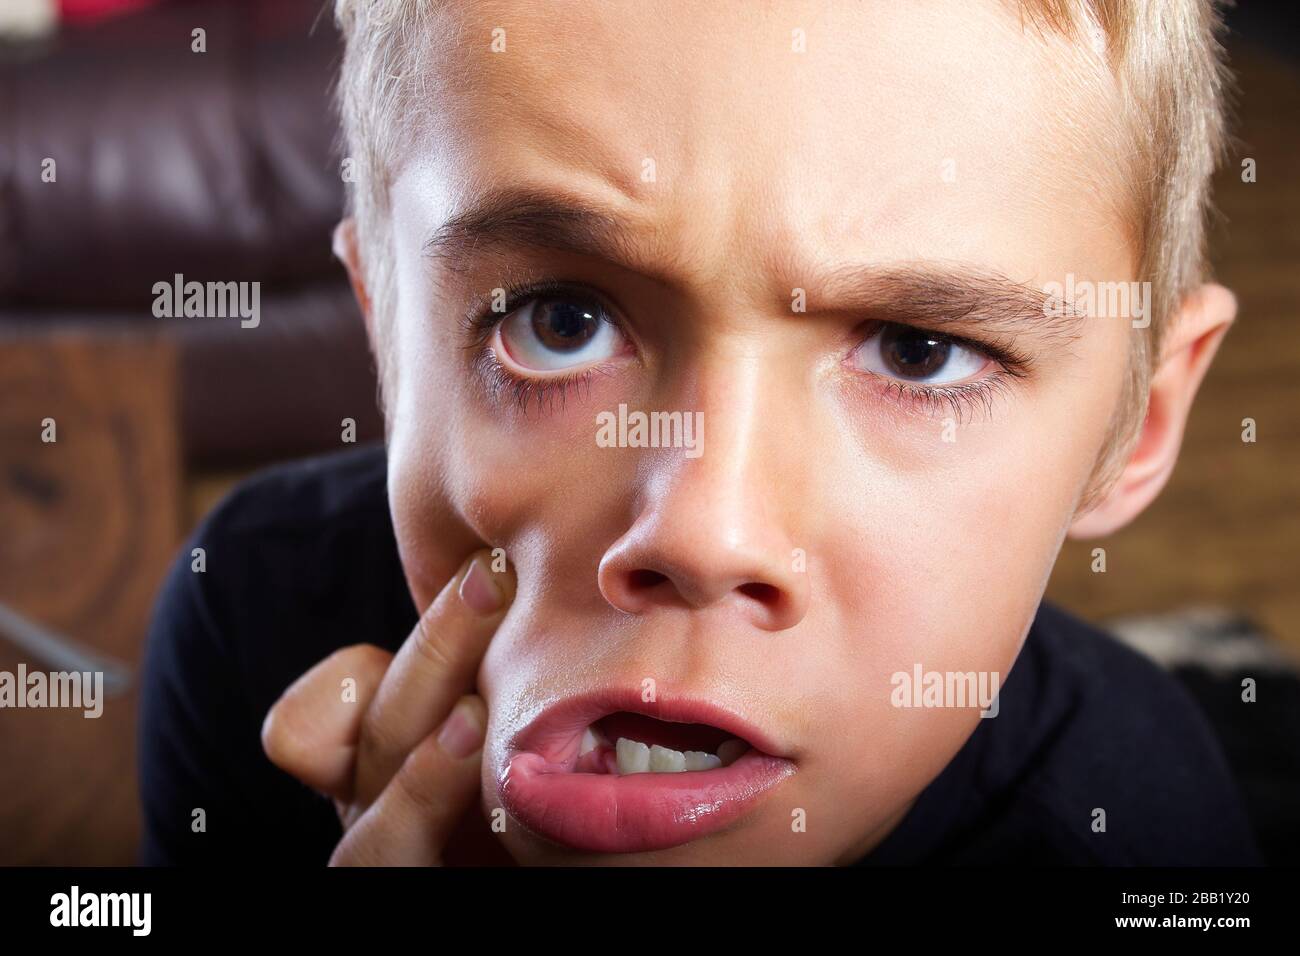 A headshot closeup photo of a beautiful young boy with a very funny facial expression and just being silly. He has hazel brown eyes and blonde hair. Stock Photo